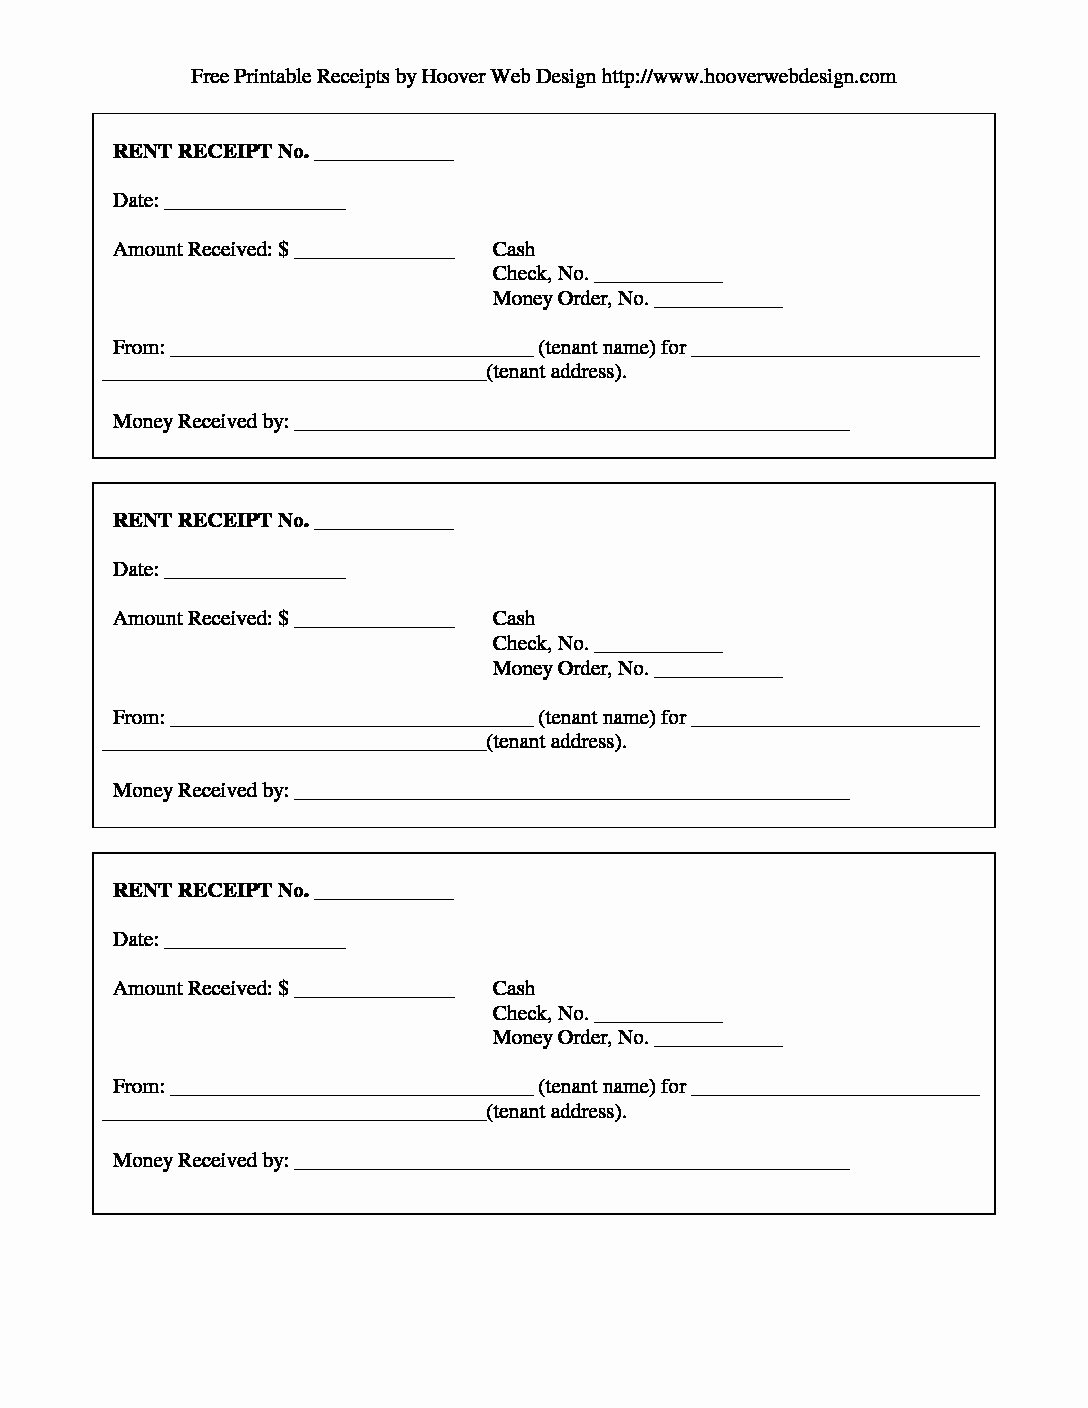 Free Rent Receipt Template and What Information to Include